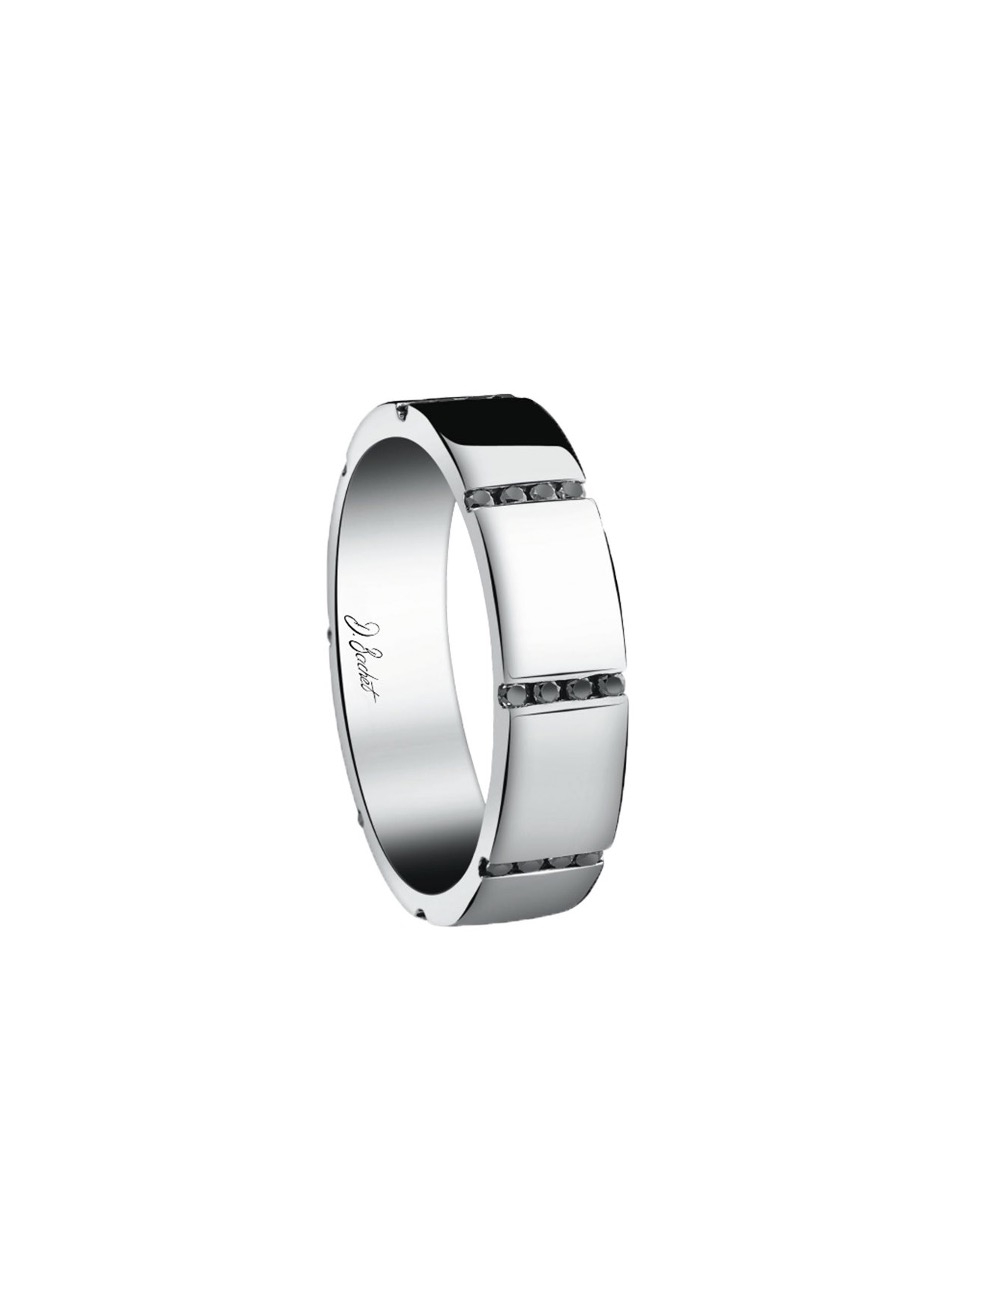 For men looking for a more modern style, a wedding band in platinum and black diamonds